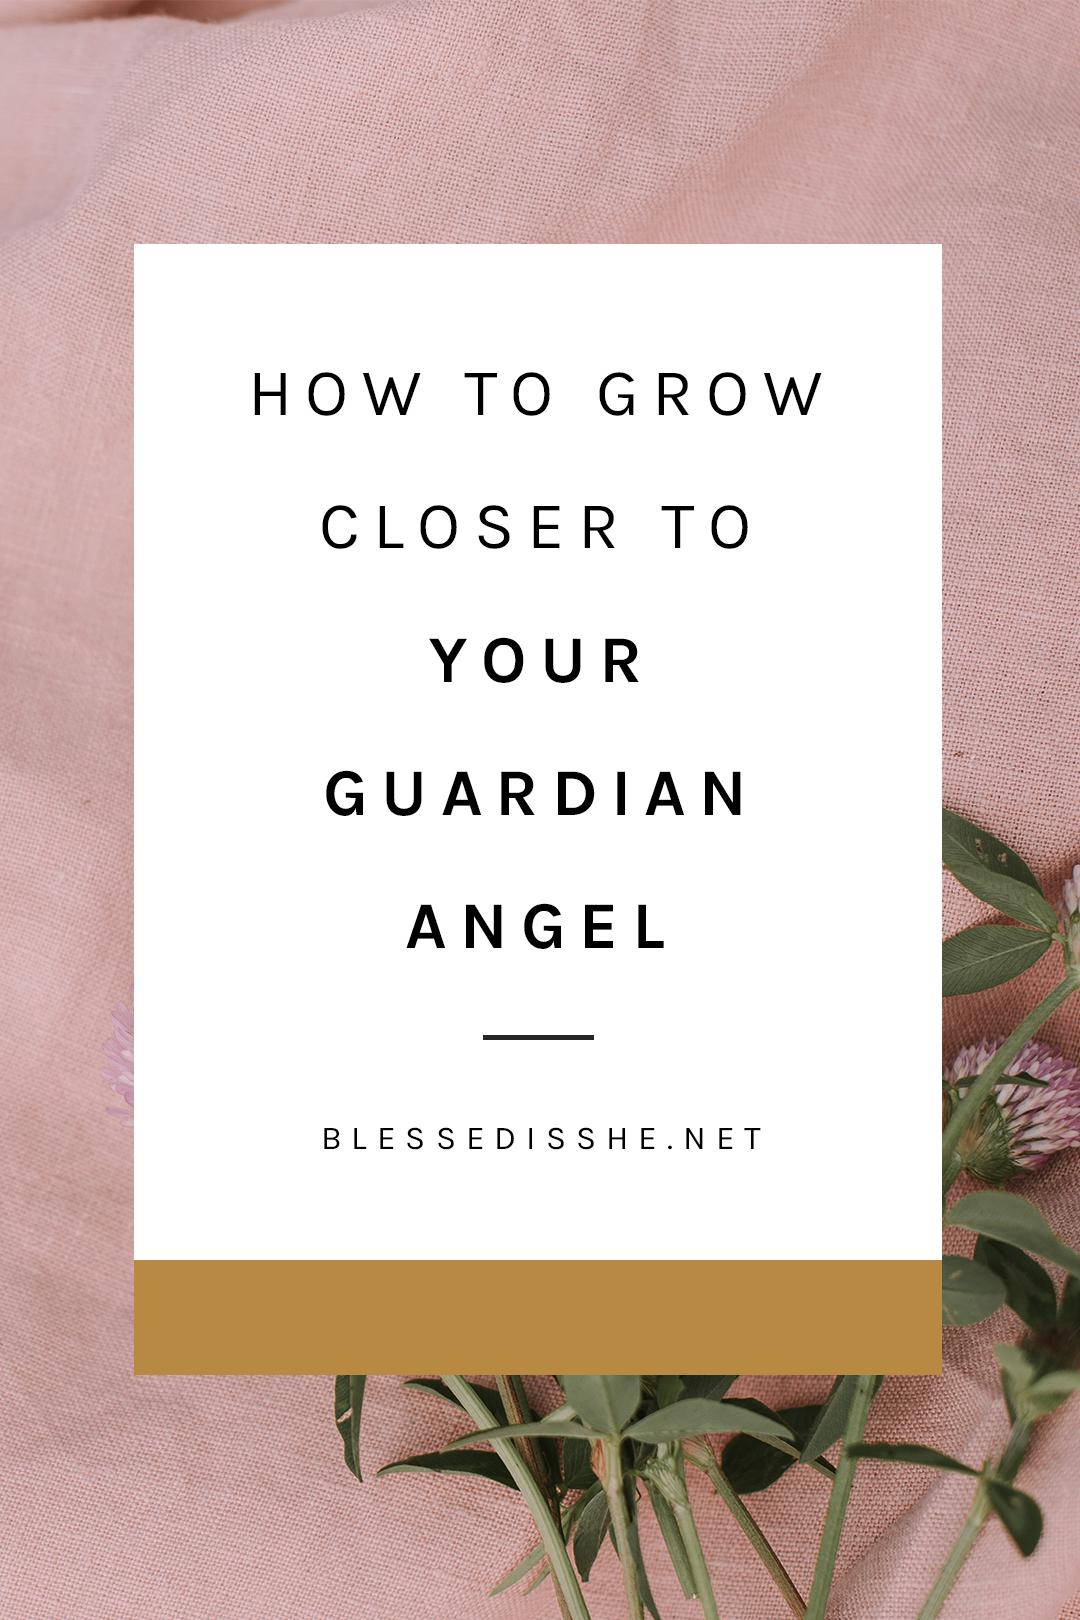 How to Thank Your Guardian Angel - Learn Religions